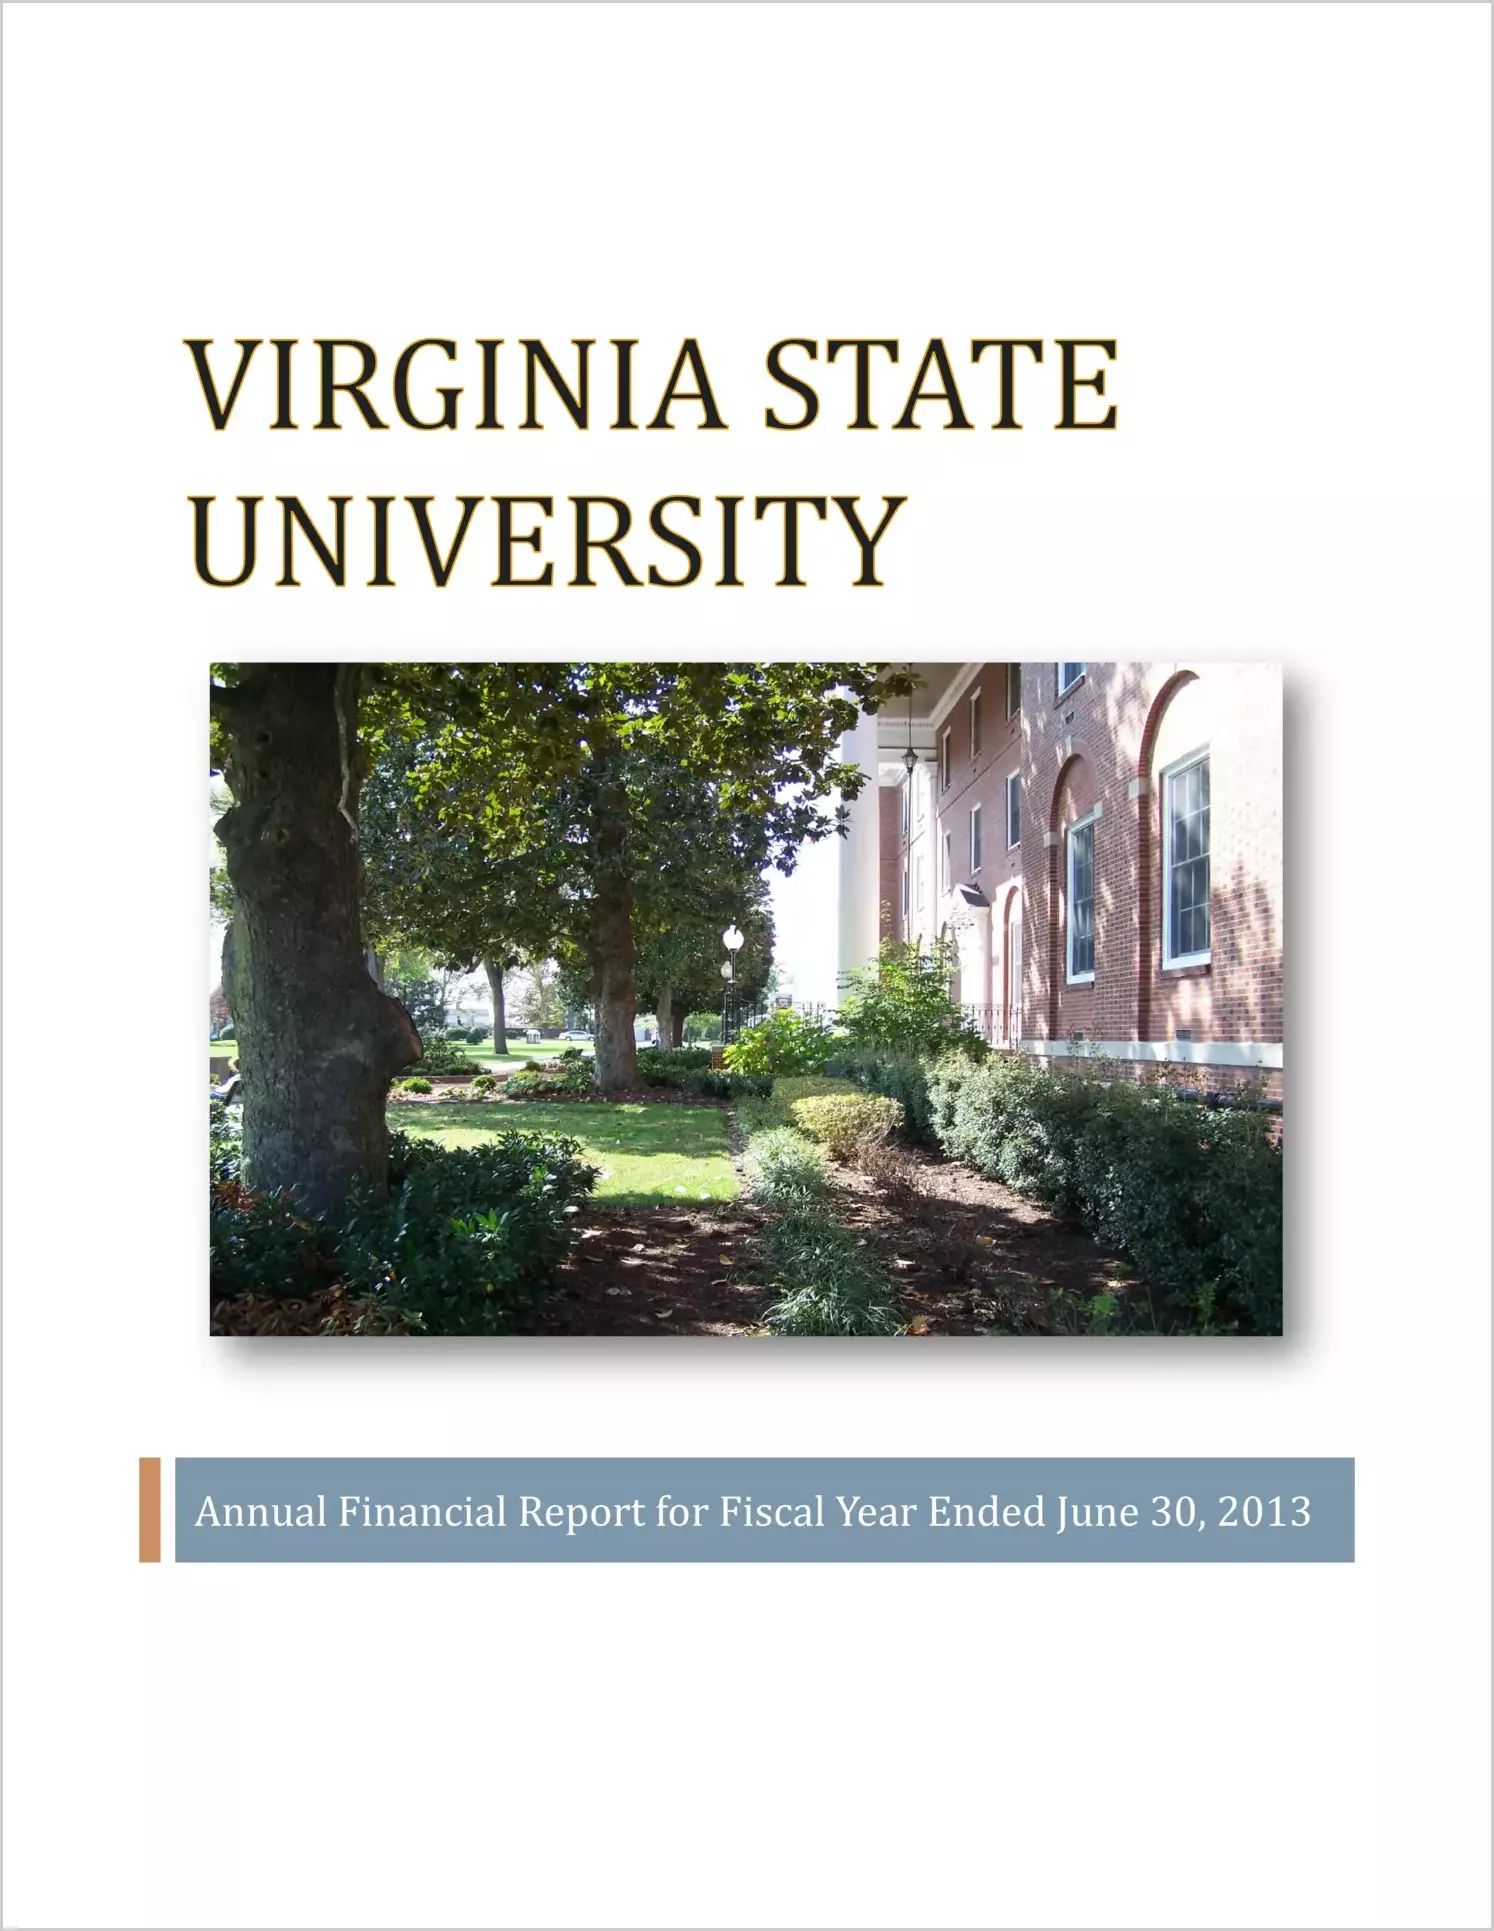 Virginia State University Financial Statement for the year ended June 30, 2013